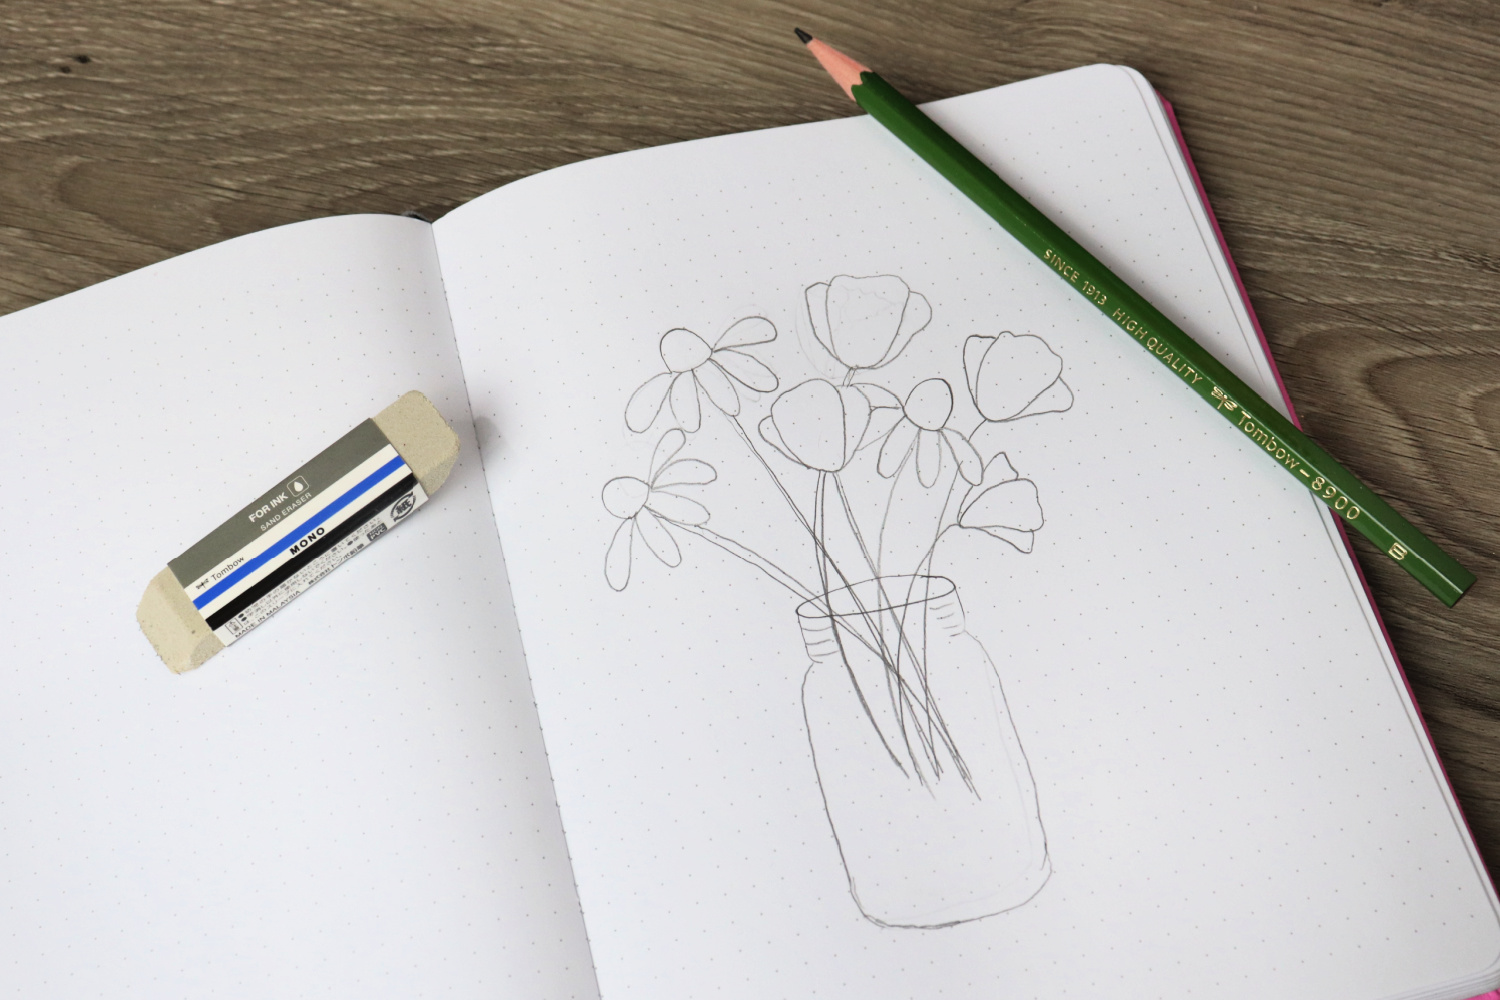 Image contains an open sketchbook with a bouquet of flowers in a mason jar sketched in pencil. A green pencil sits on top of the page, and a MONO Sand Eraser sits on the sketchbook as well.